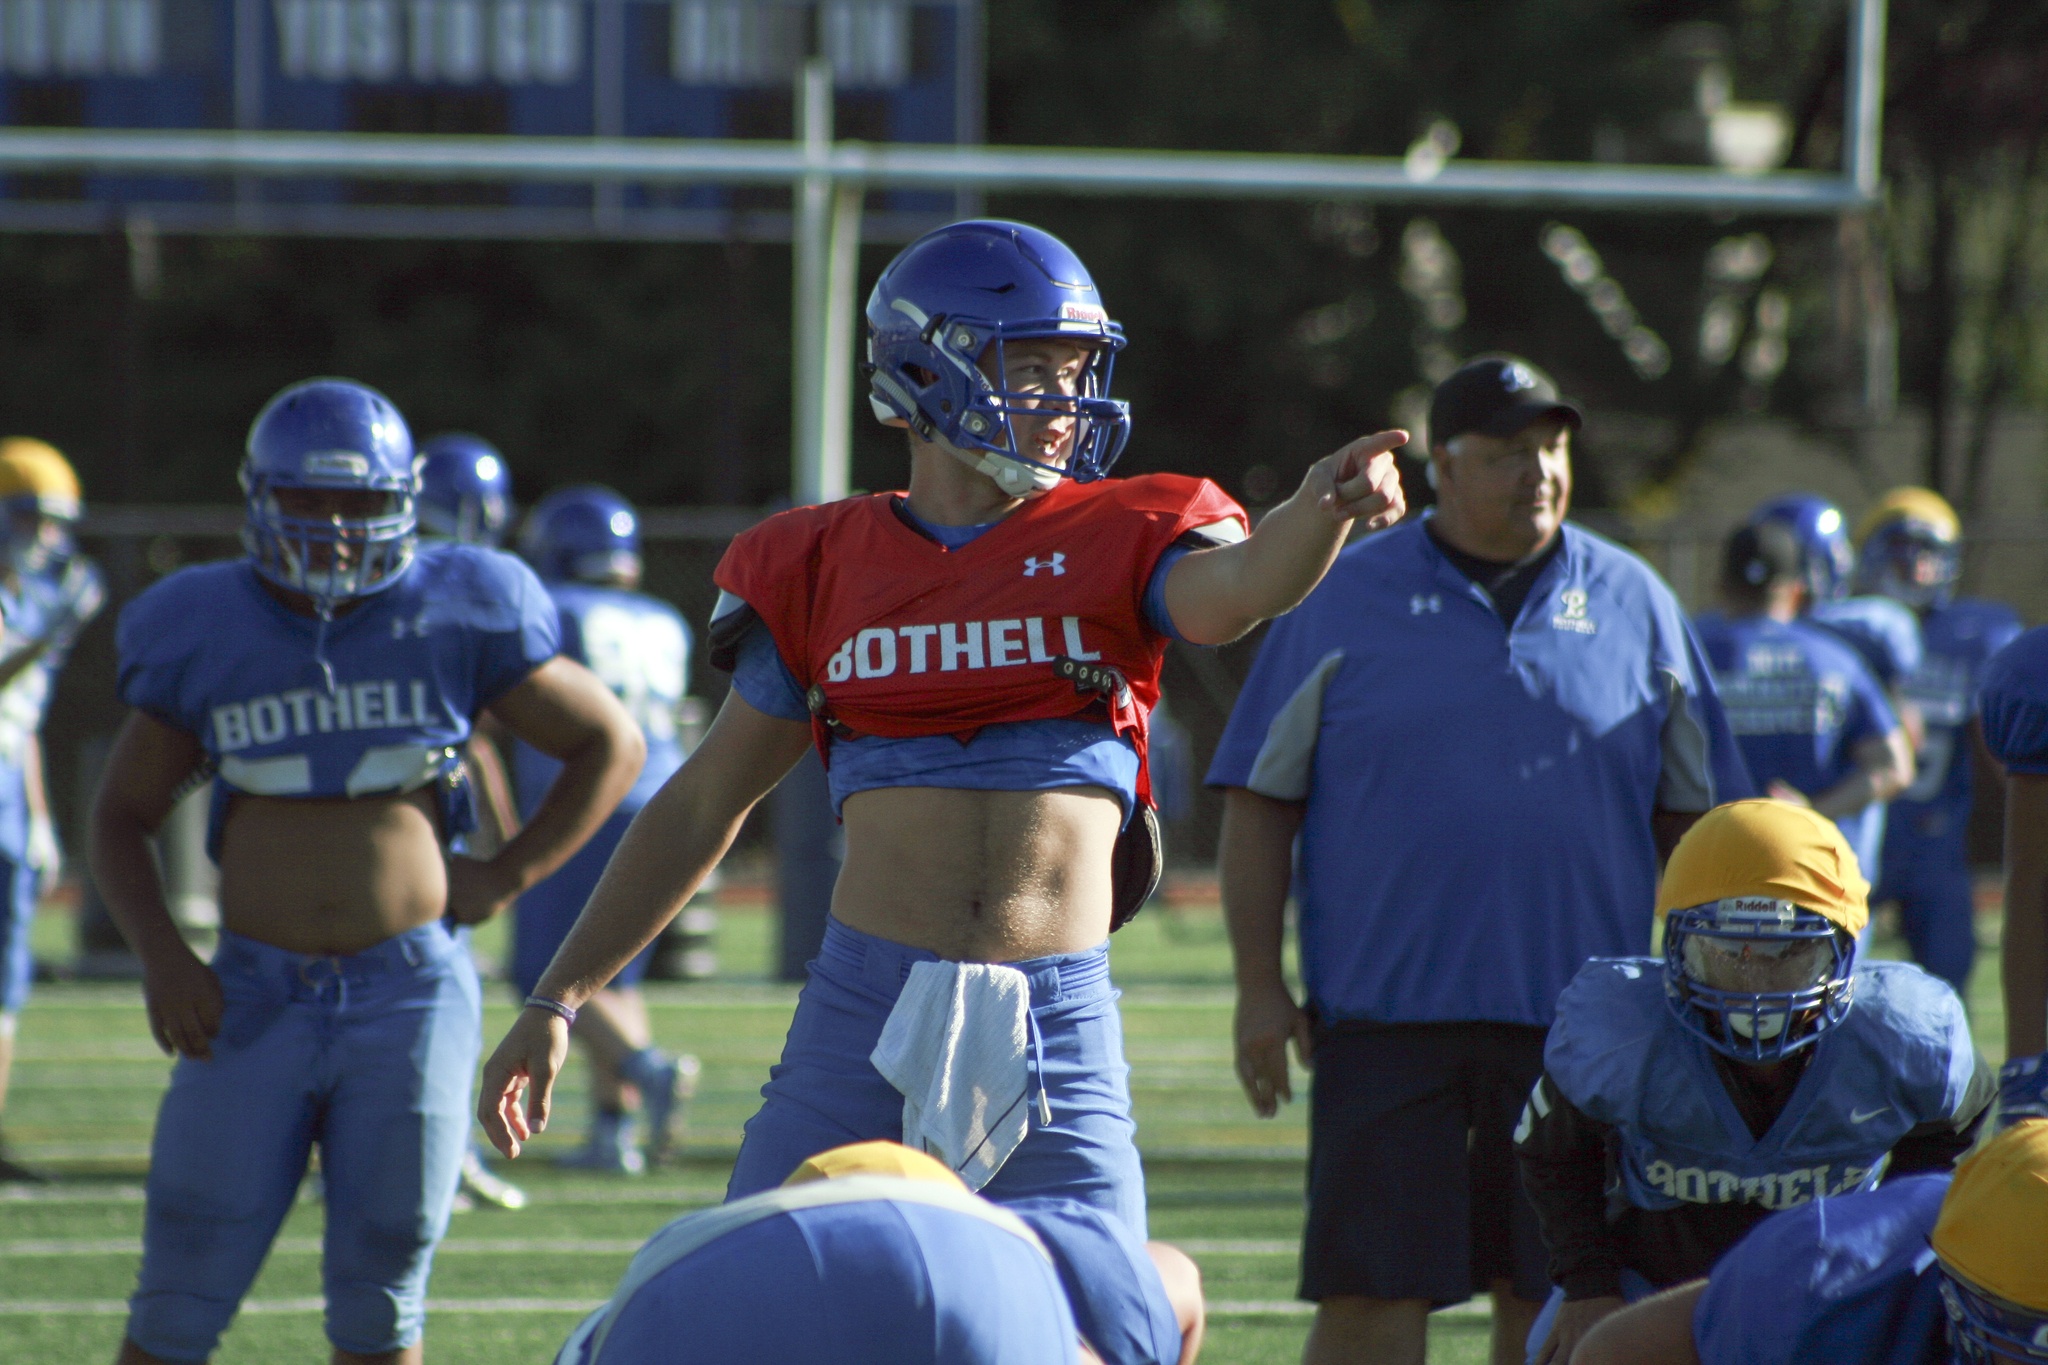 Bothell junior quarterback Jacob Sirmon directs players during practice on Aug. 22. Sirmon said he is an entirely different quarterback with a year of experience under his belt. For the full Bothell High School football preview story